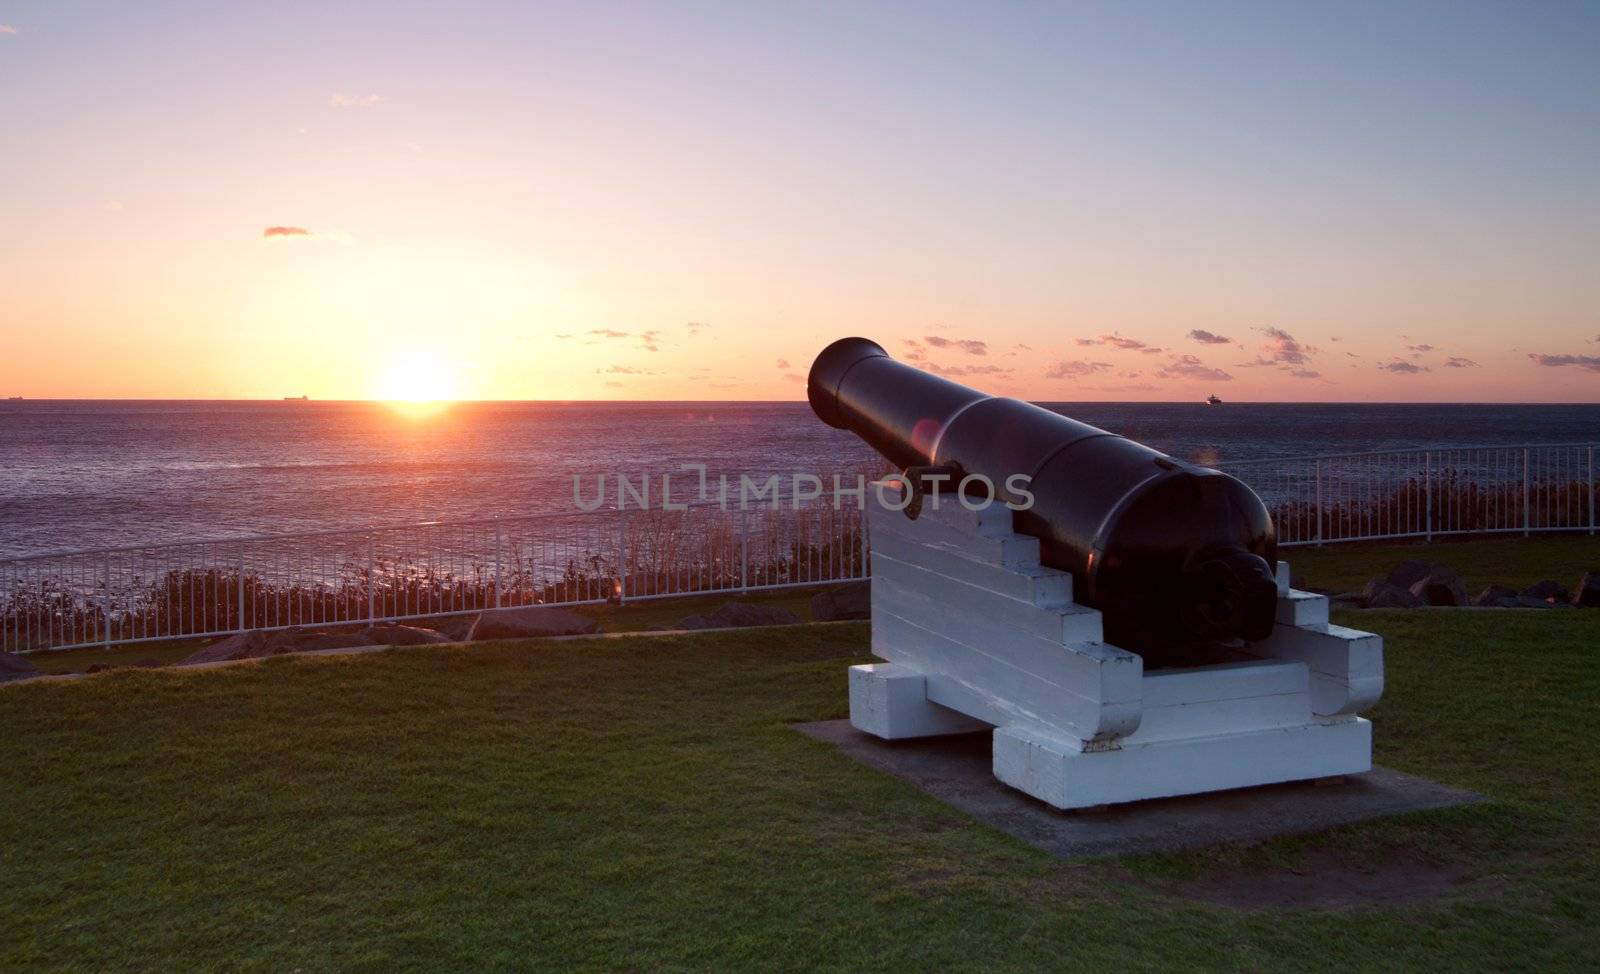 sunrise over the ocean and cannons at wollongong